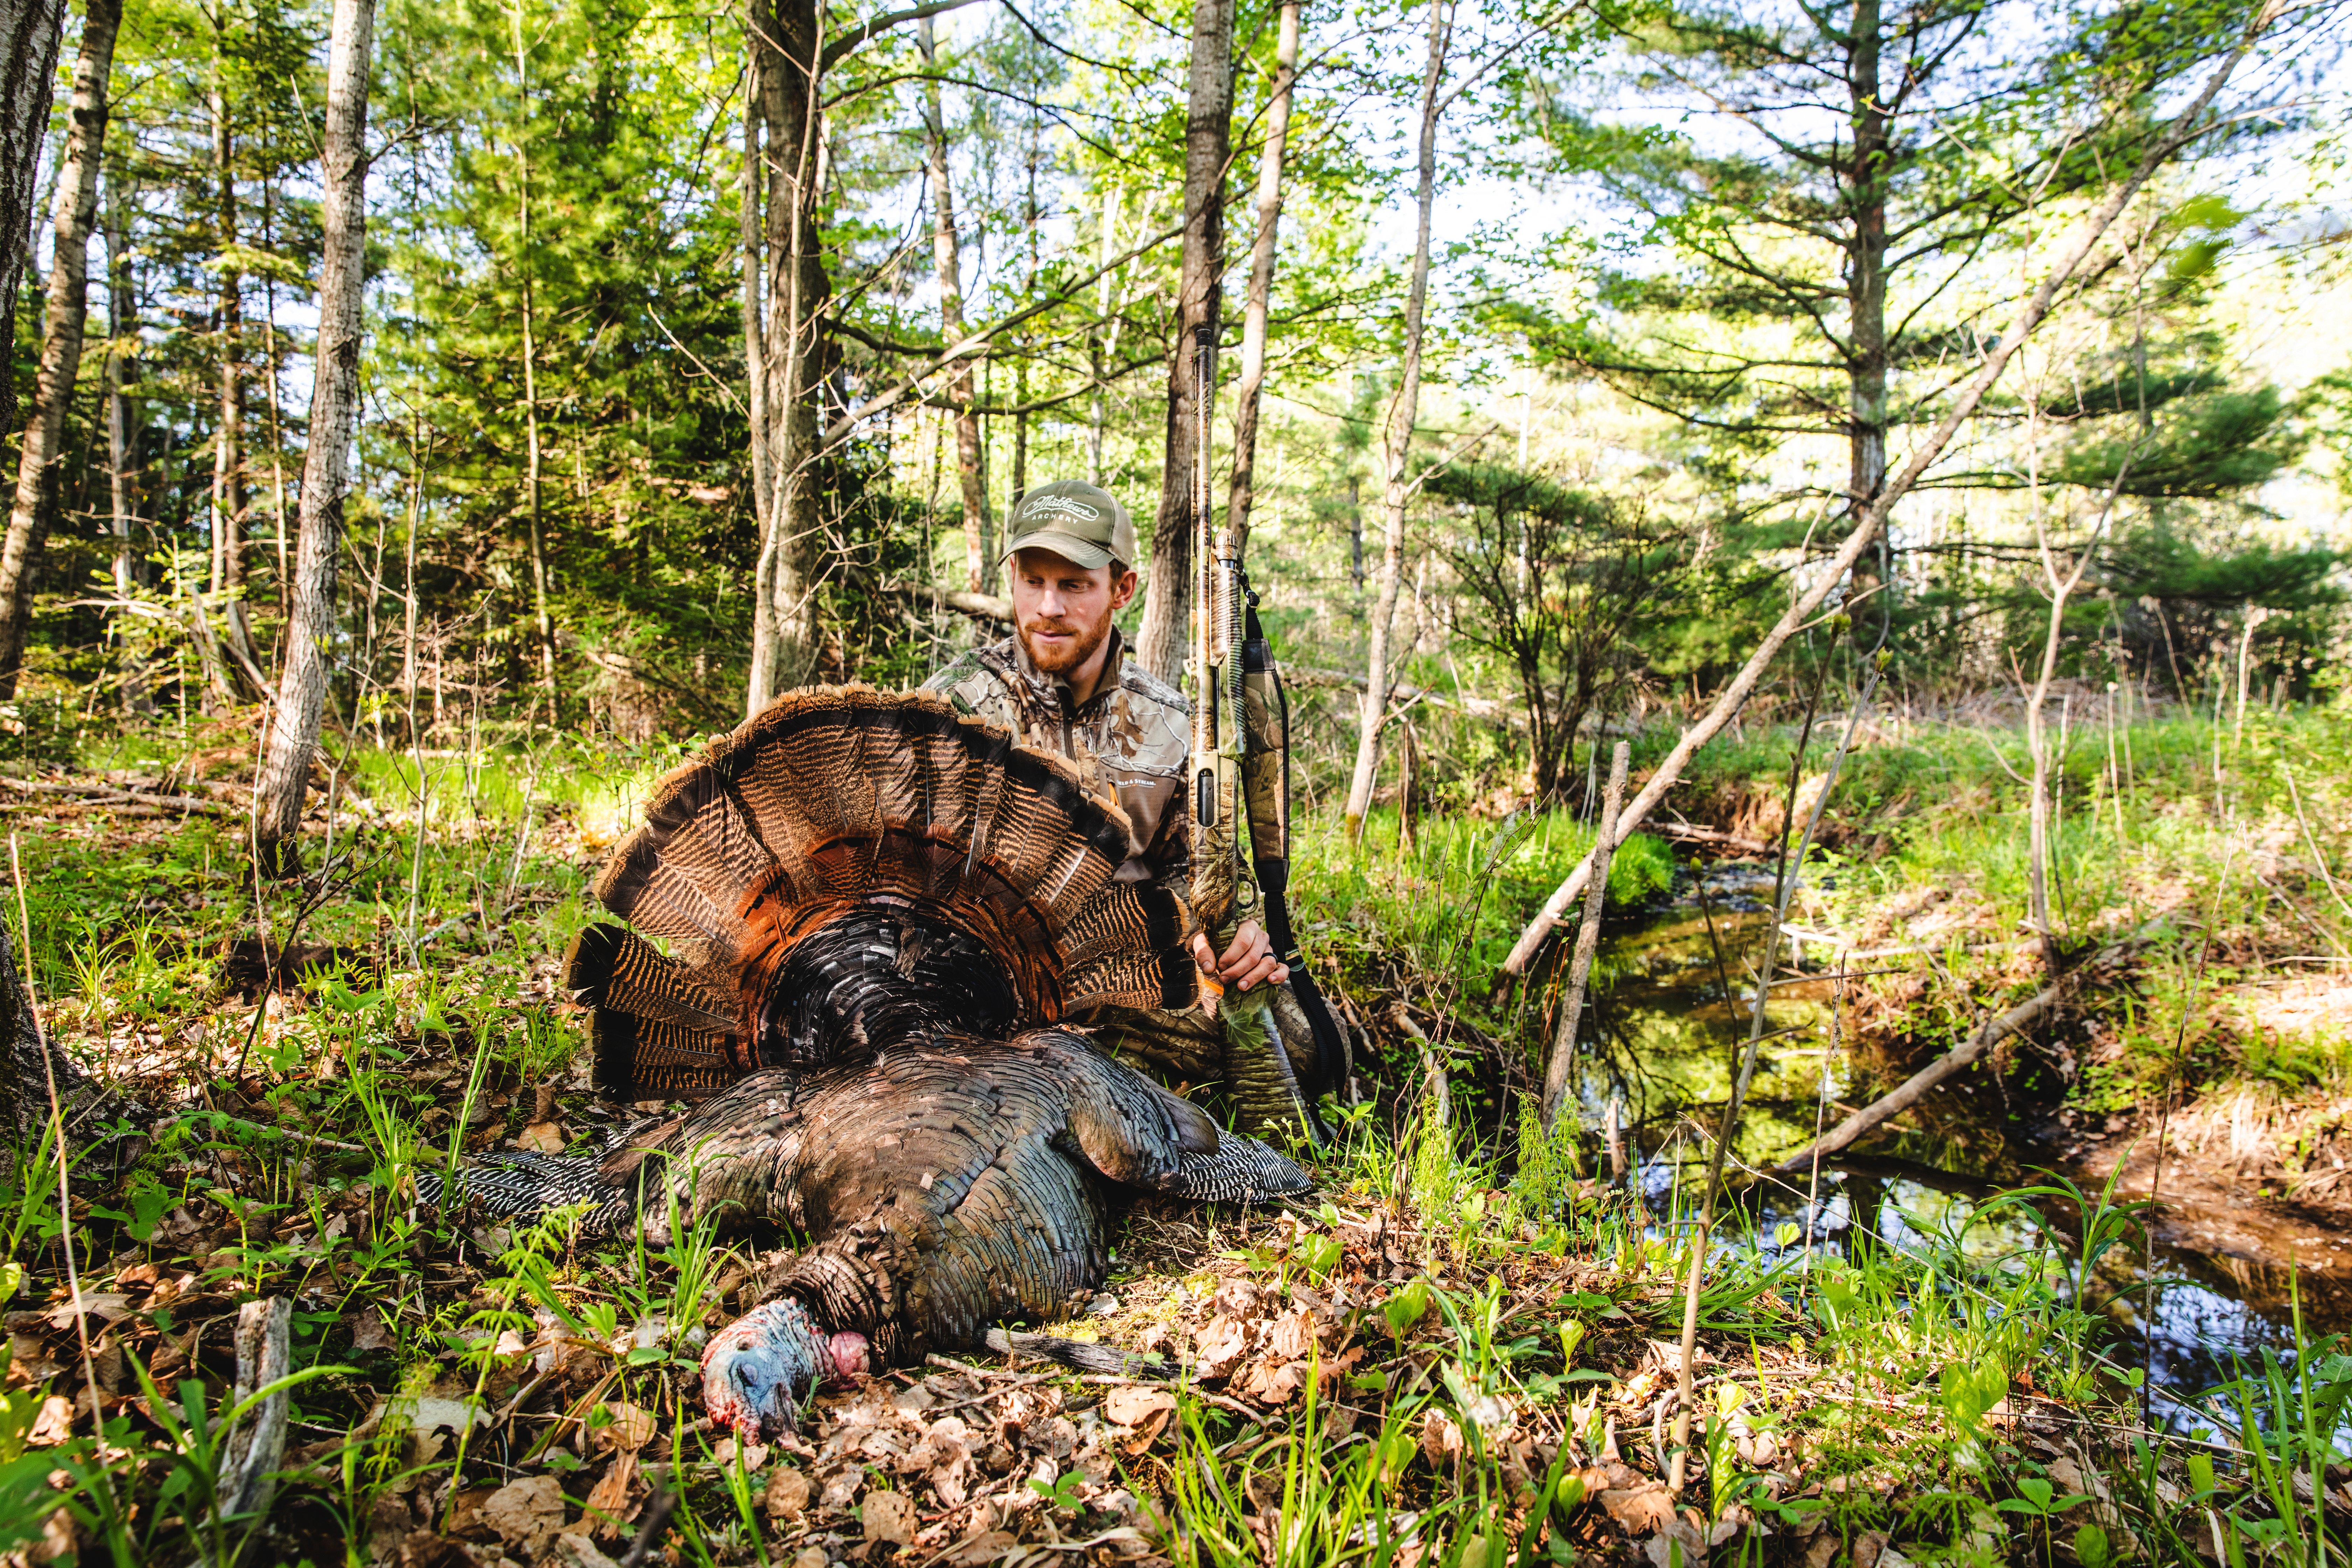 Author Darron McDougal nailed this gobbler not far from the pavement after diving off a parking area where no one else had been hunting. Image by Becca McDougal